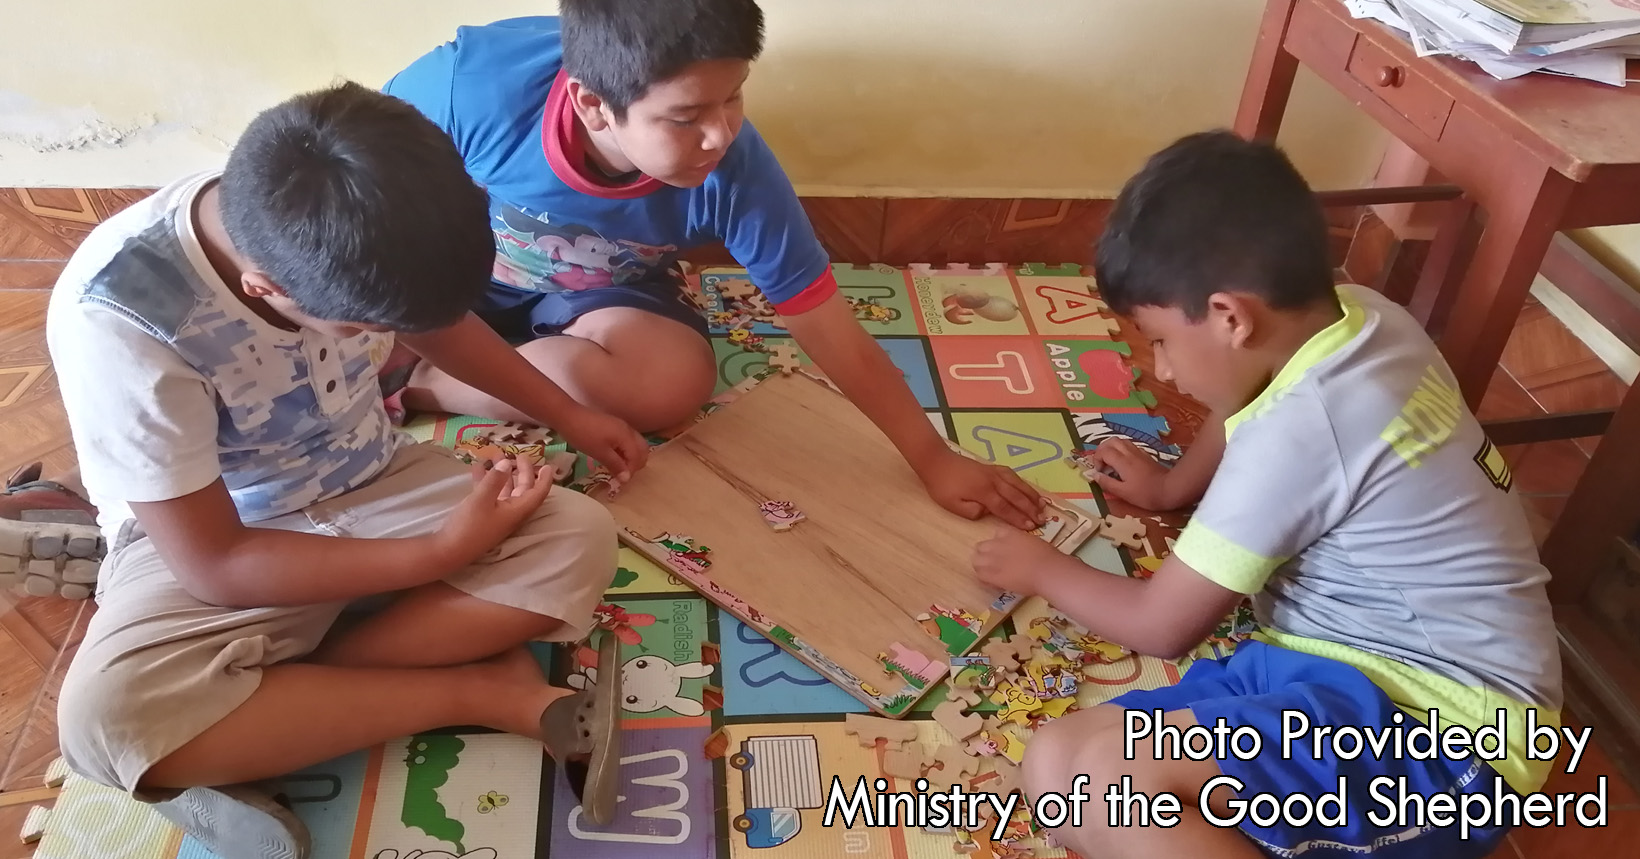 A group of three young boys are playing together in one of the Child Care Centers. They sit upon the floor and are discussing how to put together a puzzle.